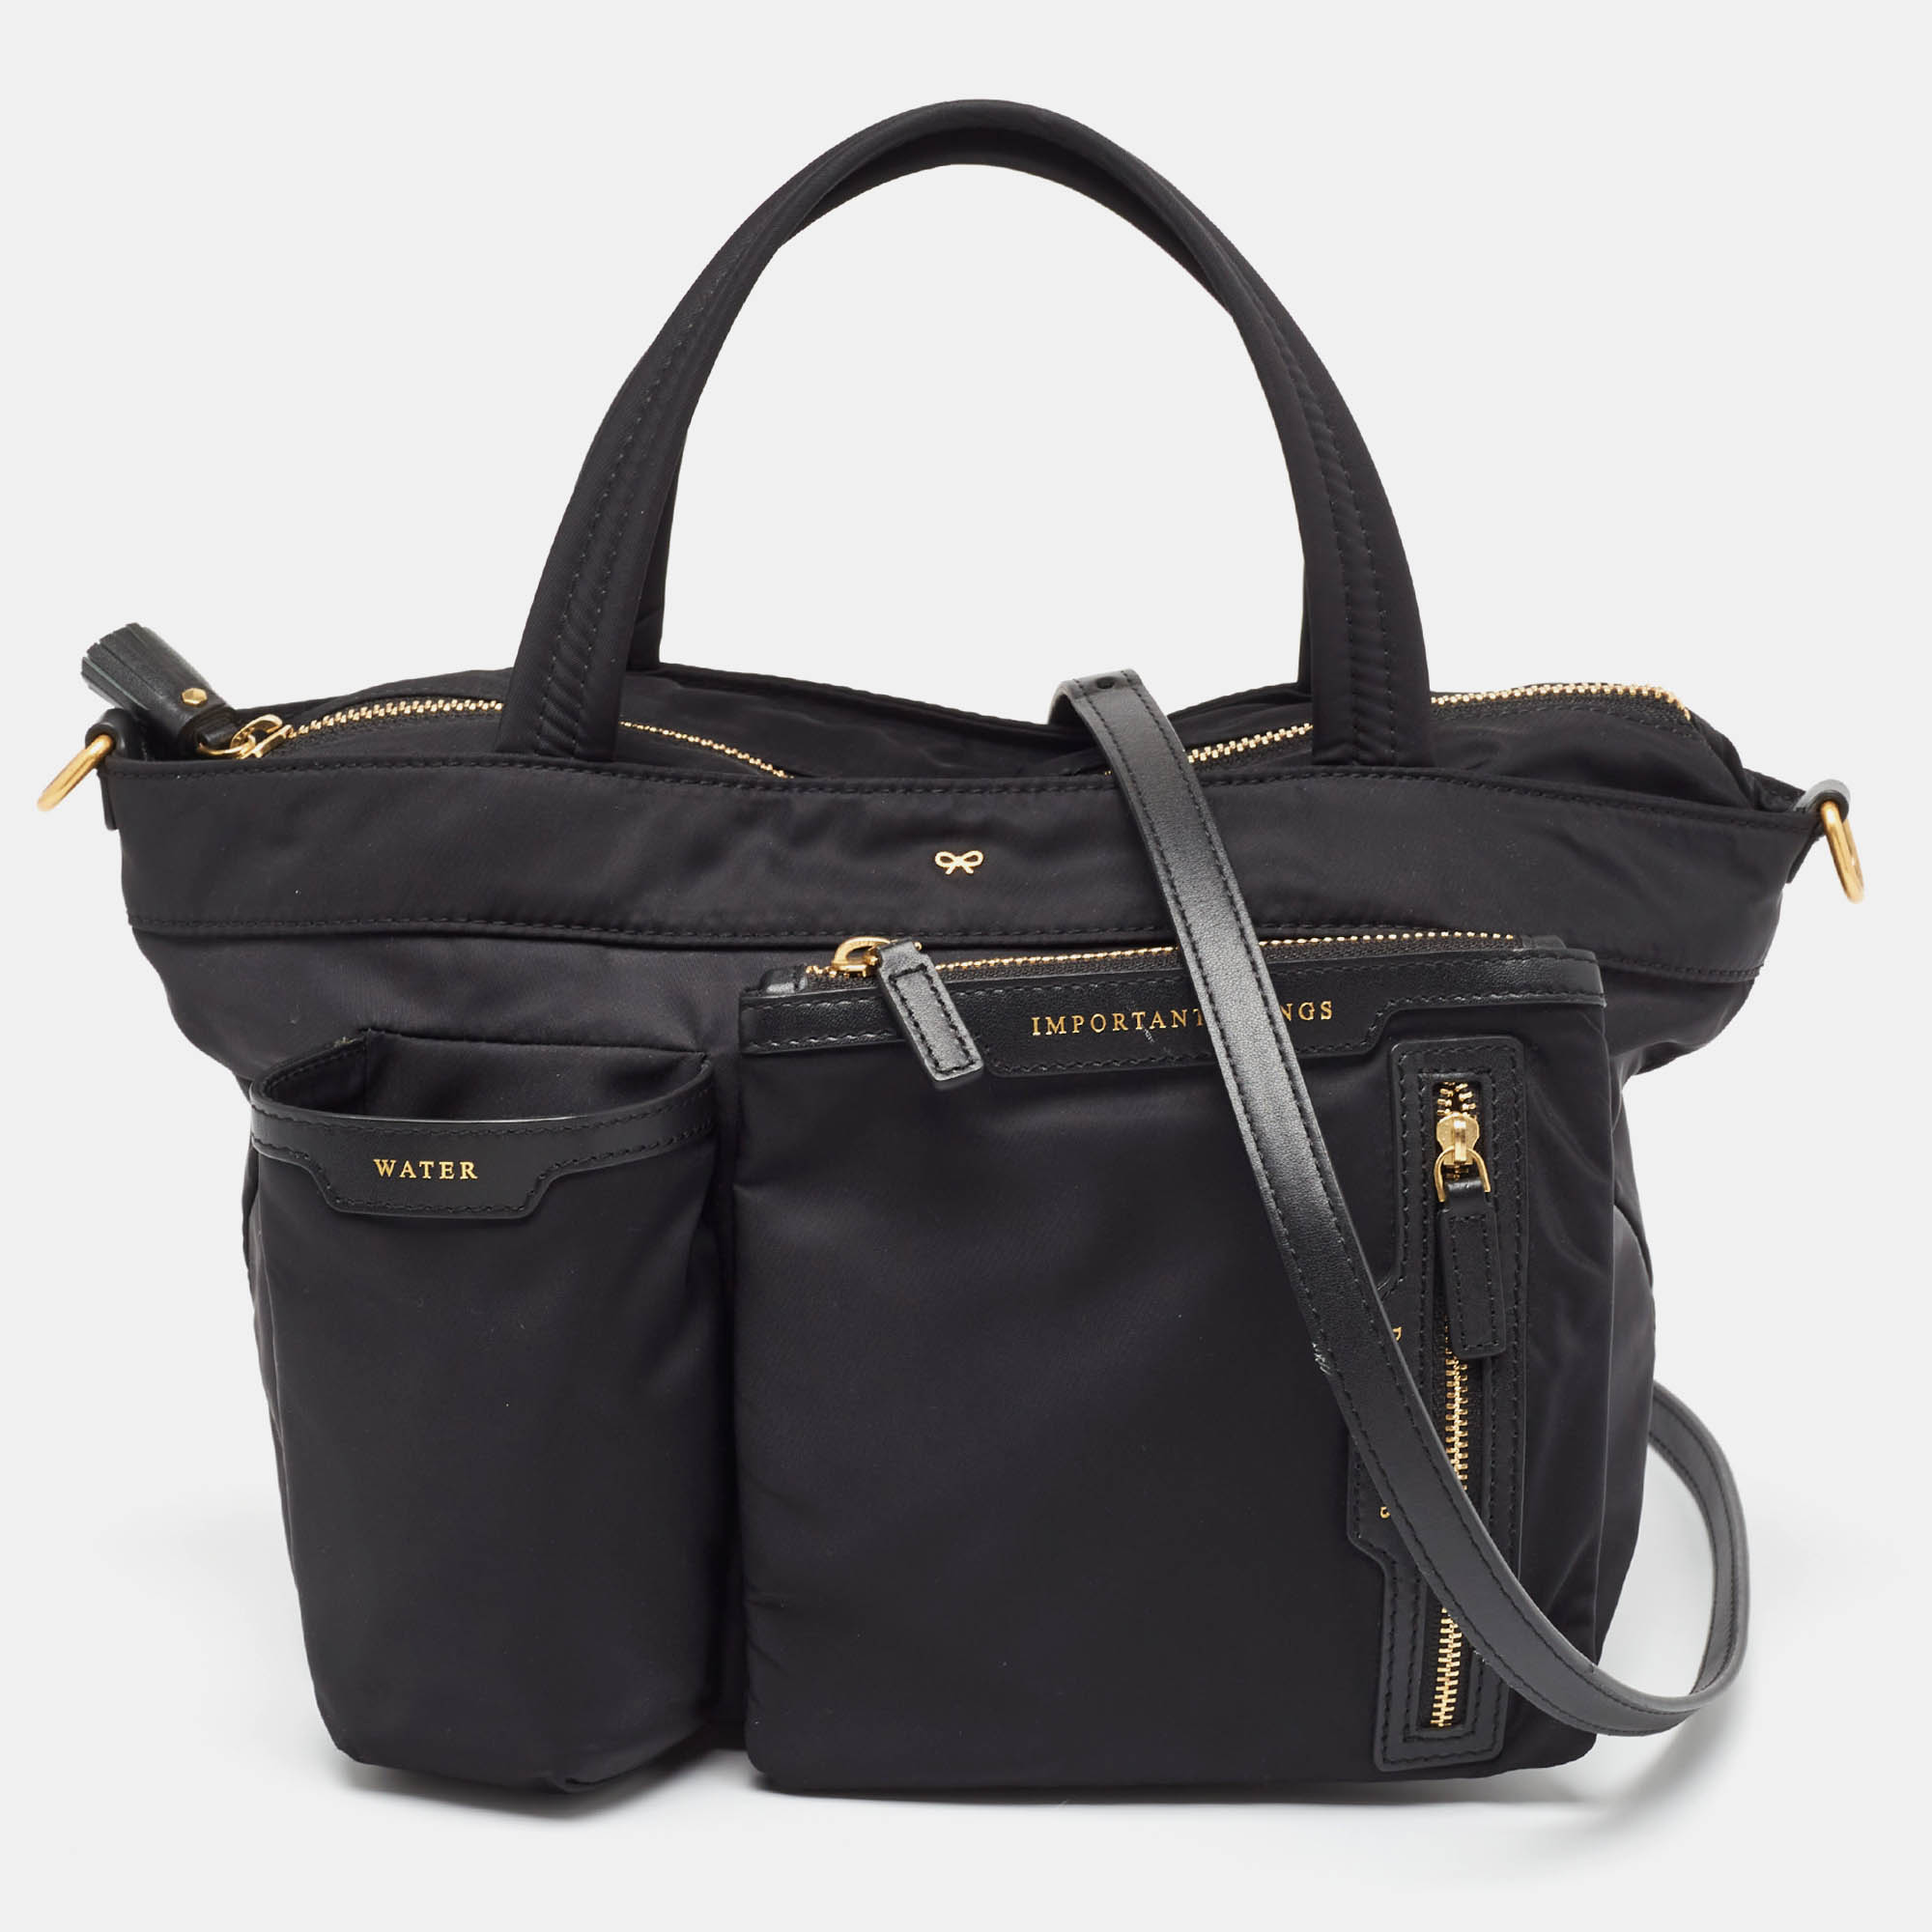 Created from high quality materials this tote is enriched with functional and classic elements. It can be carried around conveniently and its interior is perfectly sized to keep your belongings with ease.